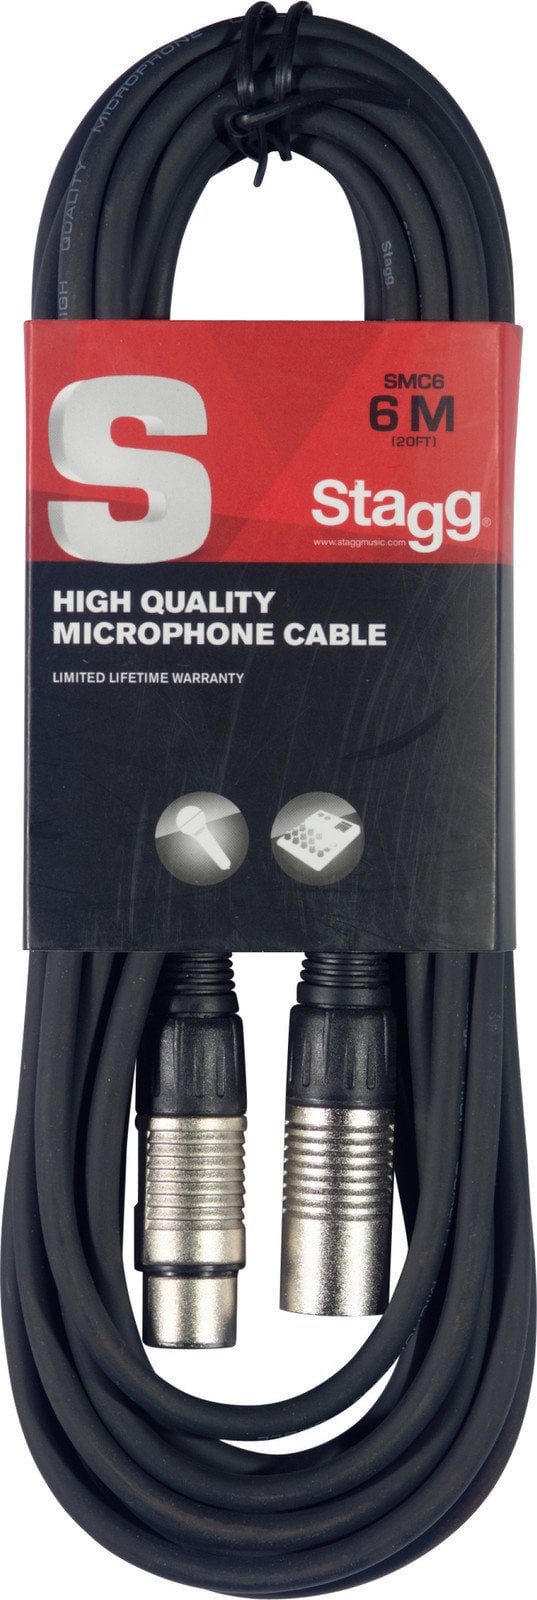 Microphone Cable Stagg SMC6 Black 6 m